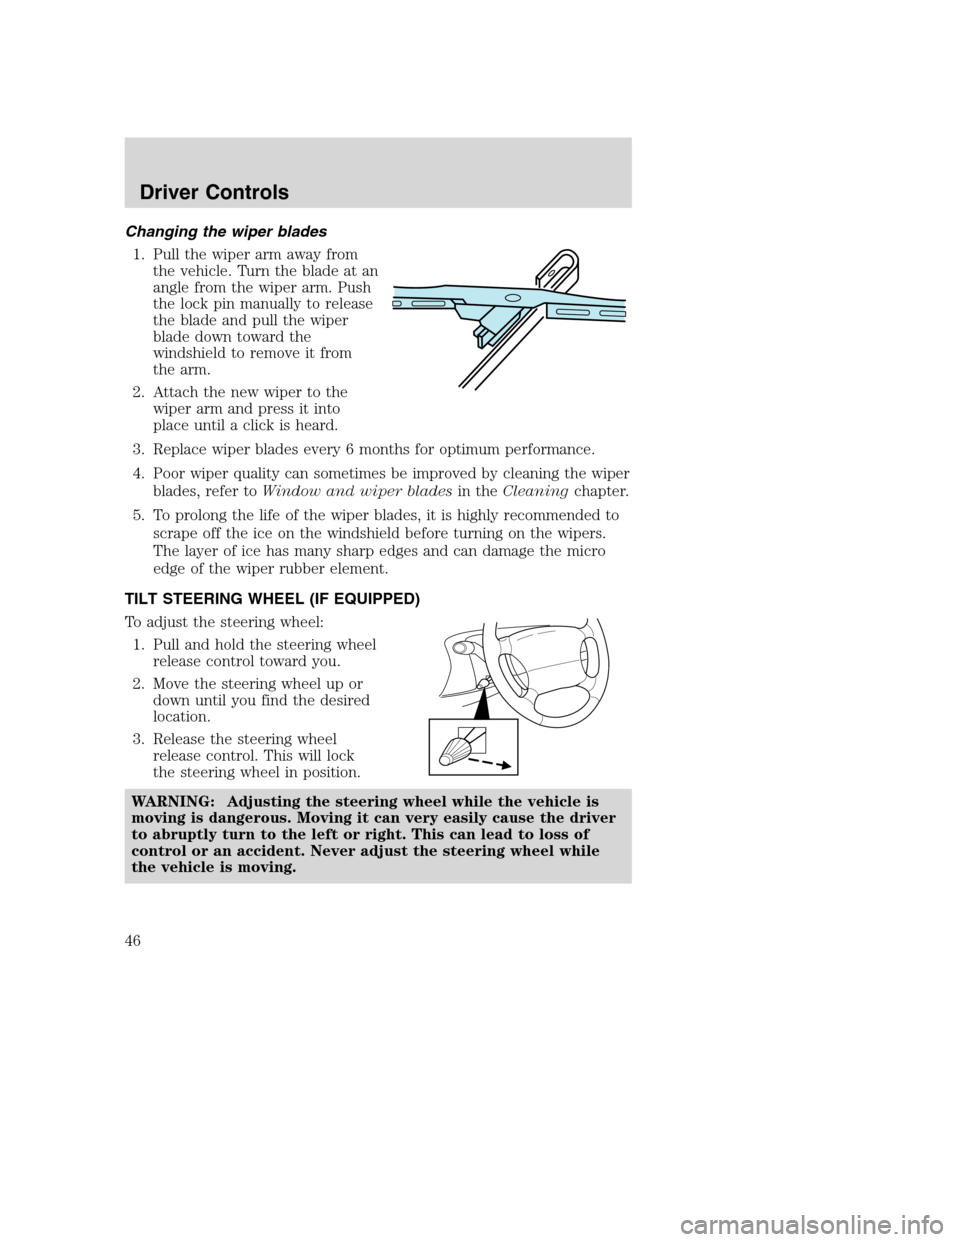 MAZDA MODEL B-SERIES 2005  Owners Manual (in English) Changing the wiper blades
1. Pull the wiper arm away from
the vehicle. Turn the blade at an
angle from the wiper arm. Push
the lock pin manually to release
the blade and pull the wiper
blade down towa